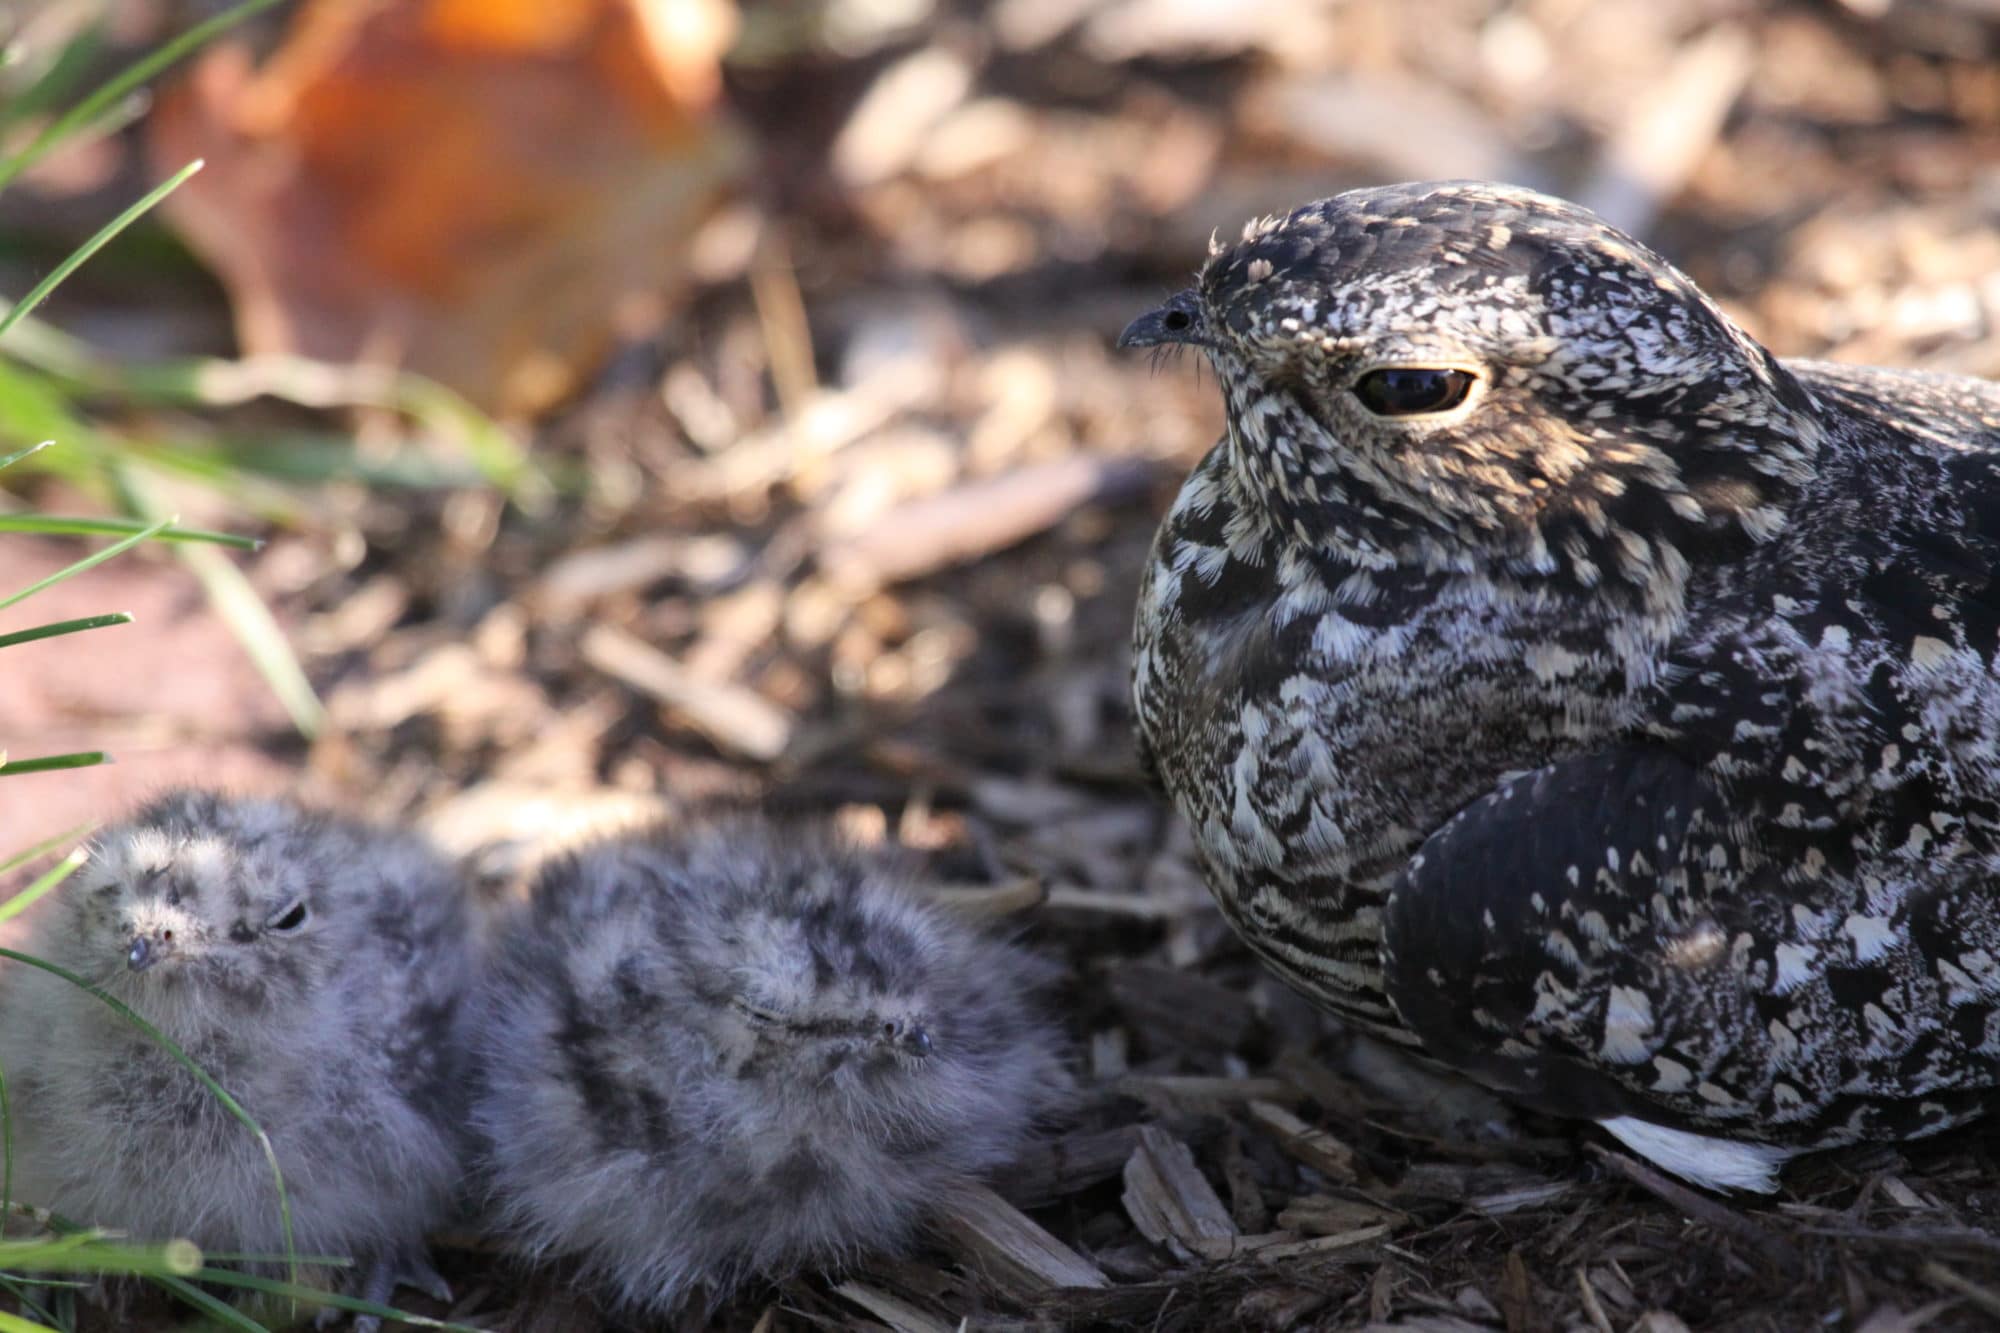 A nighthawk keeps watch over her two young chicks. (photo © Adam C. Smith Photography)